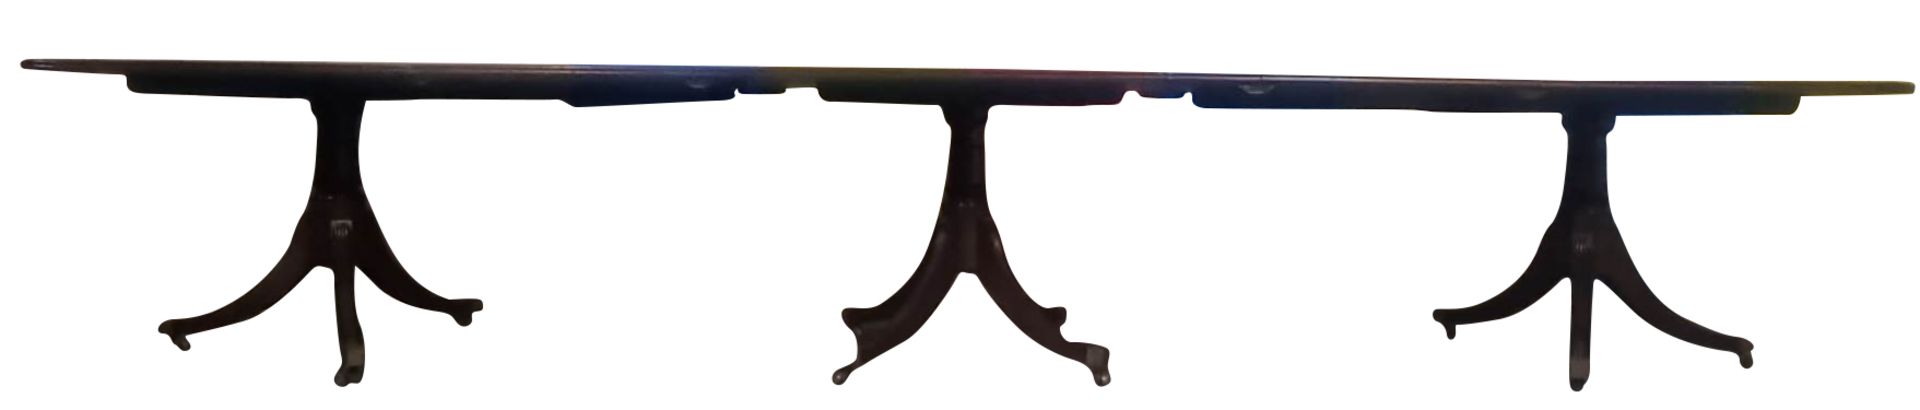 REGENCY STYLE INLAID MAHOGANY TRIPLE PESESTAL DINING TABLE - Image 2 of 10